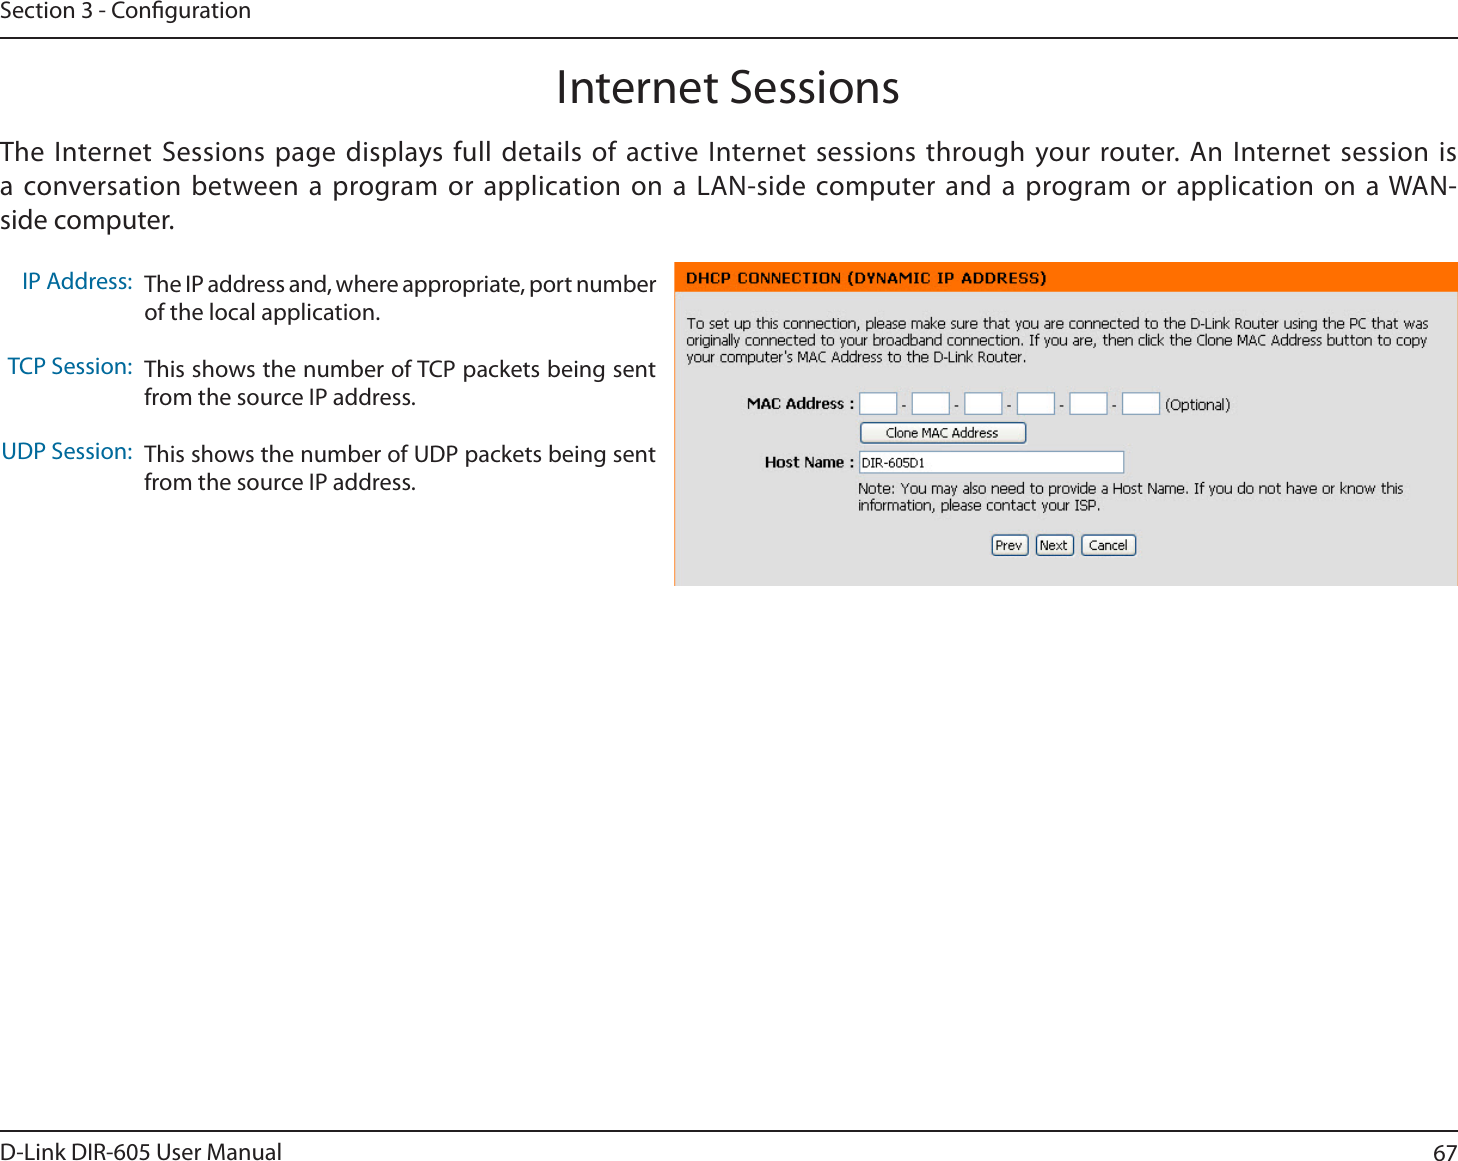 67D-Link DIR-605 User ManualSection 3 - CongurationInternet SessionsThe Internet Sessions page displays full details of active Internet sessions through your router. An Internet session is a conversation between a program or application on a LAN-side computer and a program or application on a WAN-side computer. IP Address:TCP Session:UDP Session:The IP address and, where appropriate, port number of the local application. This shows the number of TCP packets being sent from the source IP address.This shows the number of UDP packets being sent from the source IP address.